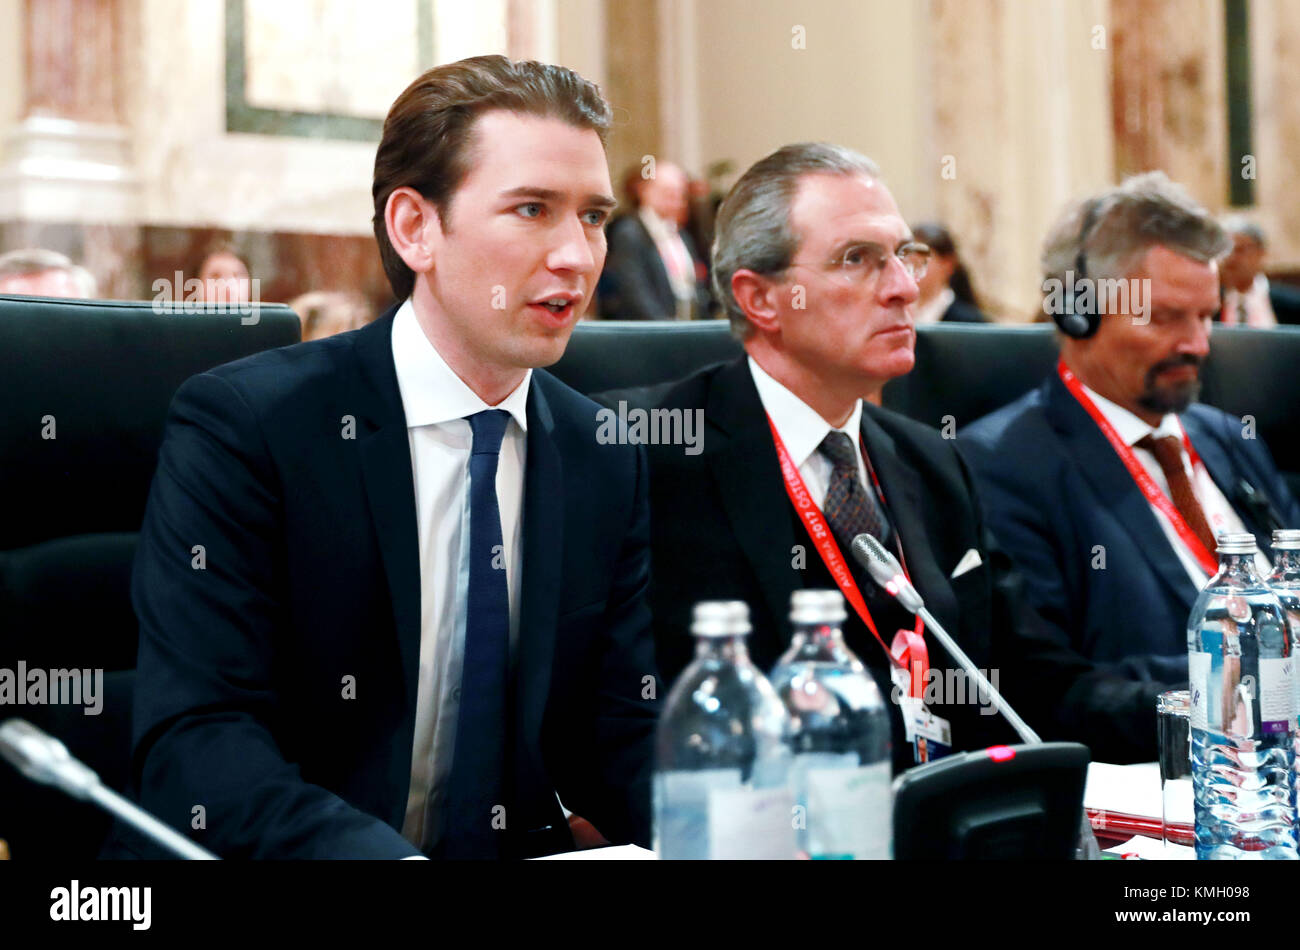 Vienna, Austria. 7th Dec, 2017. Austrian Foreign Minister Sebastian Kurz (1st L), who is also Chairperson-in-Office of the Organization for Security and Co-operation in Europe (OSCE), speaks at the OSCE's 24th Ministerial Council in Vienna, Austria, Dec. 7, 2017. Credit: Pan Xu/Xinhua/Alamy Live News Stock Photo